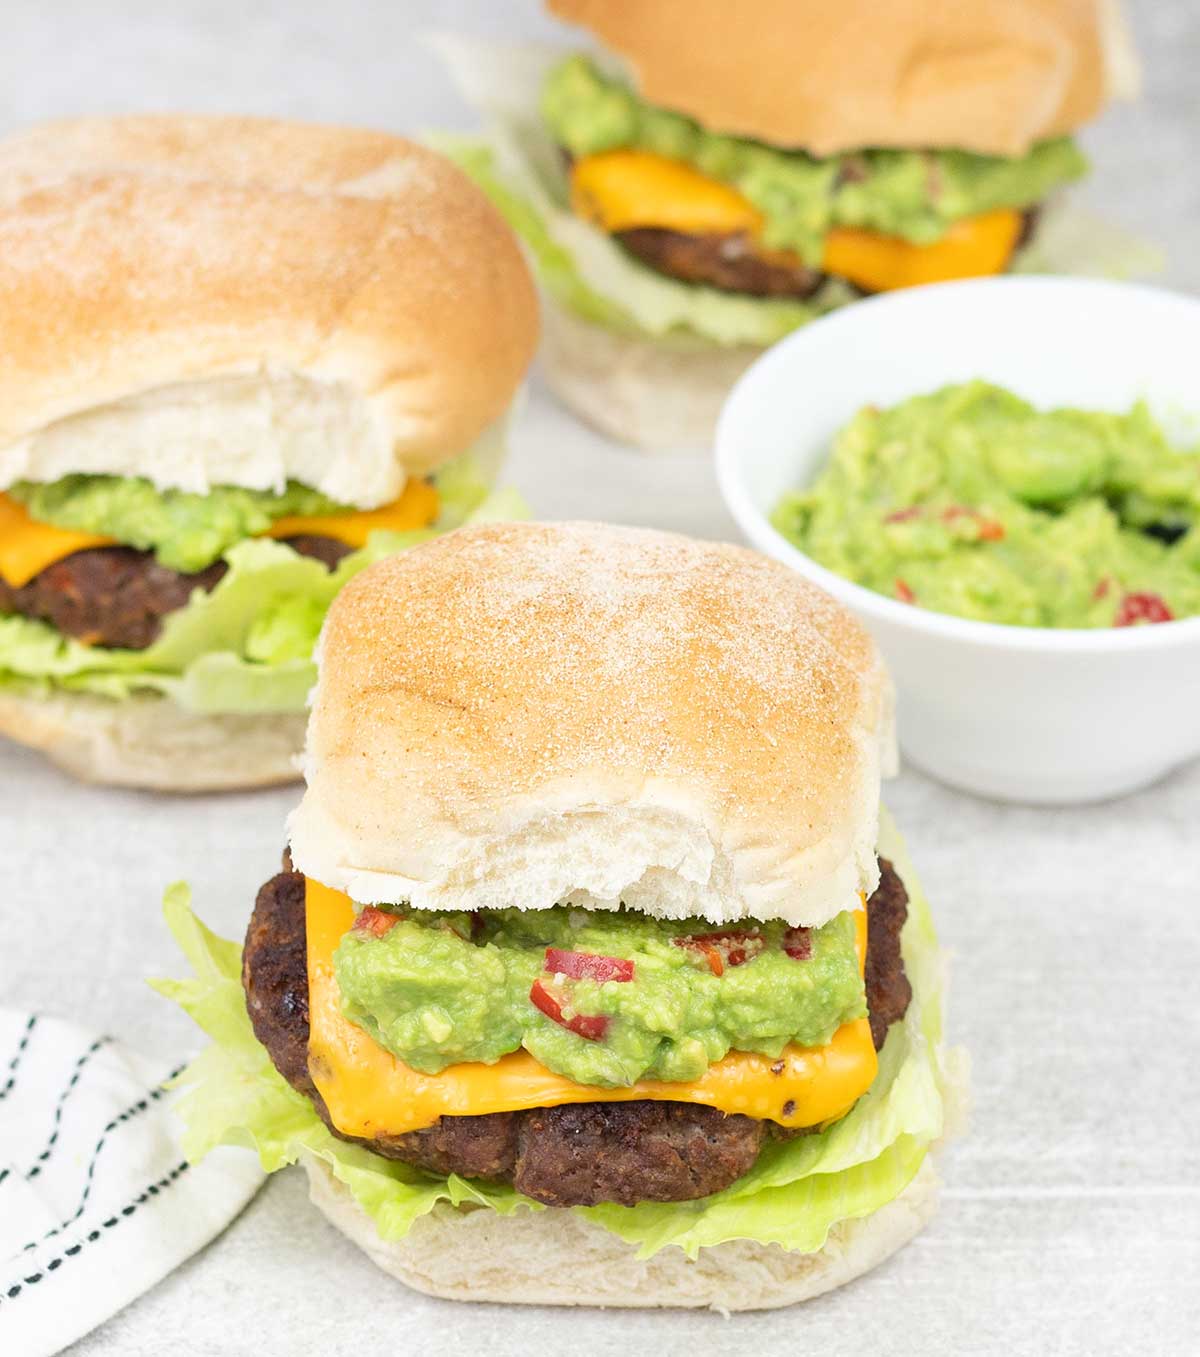 3 Mexican burgers and a small bowl of guacamole.